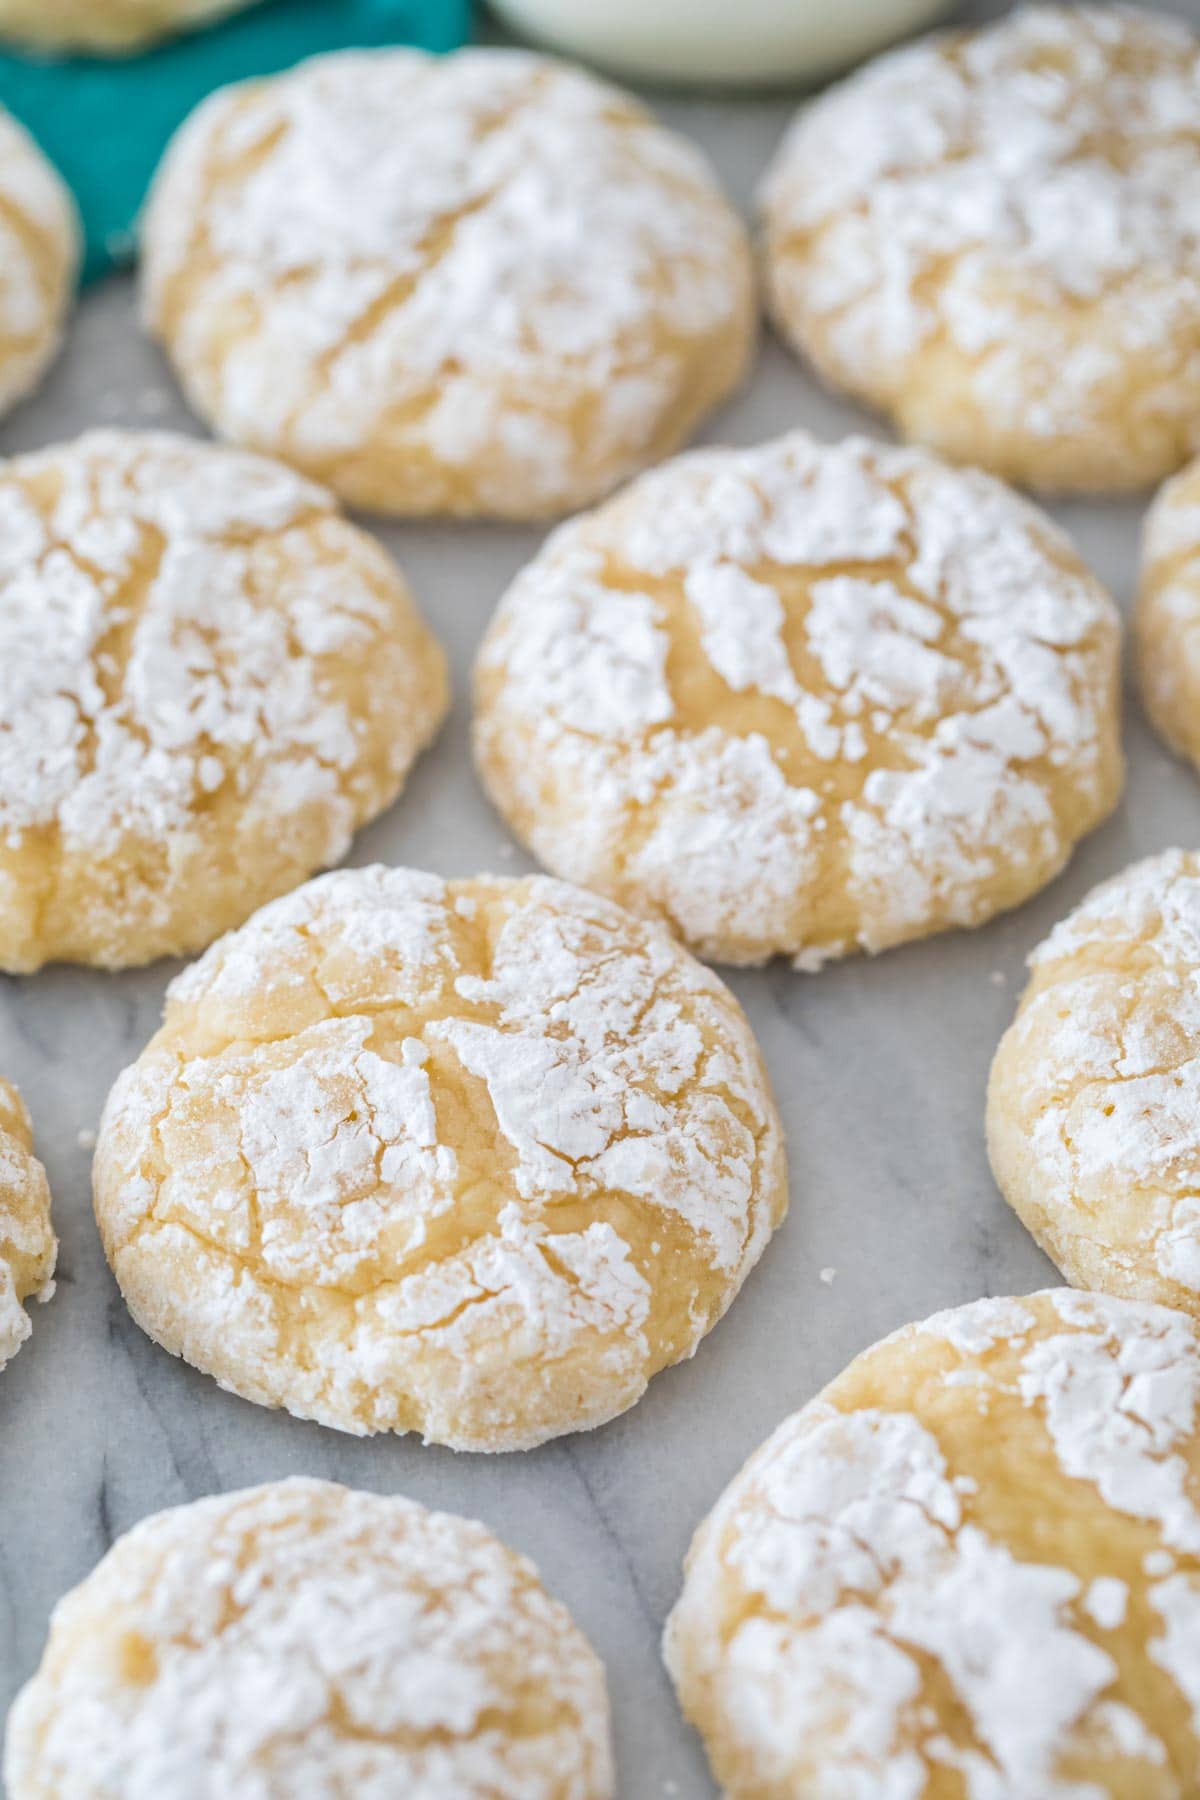 neat rows of gooey butter cookies with crinkly, powdered sugar tops